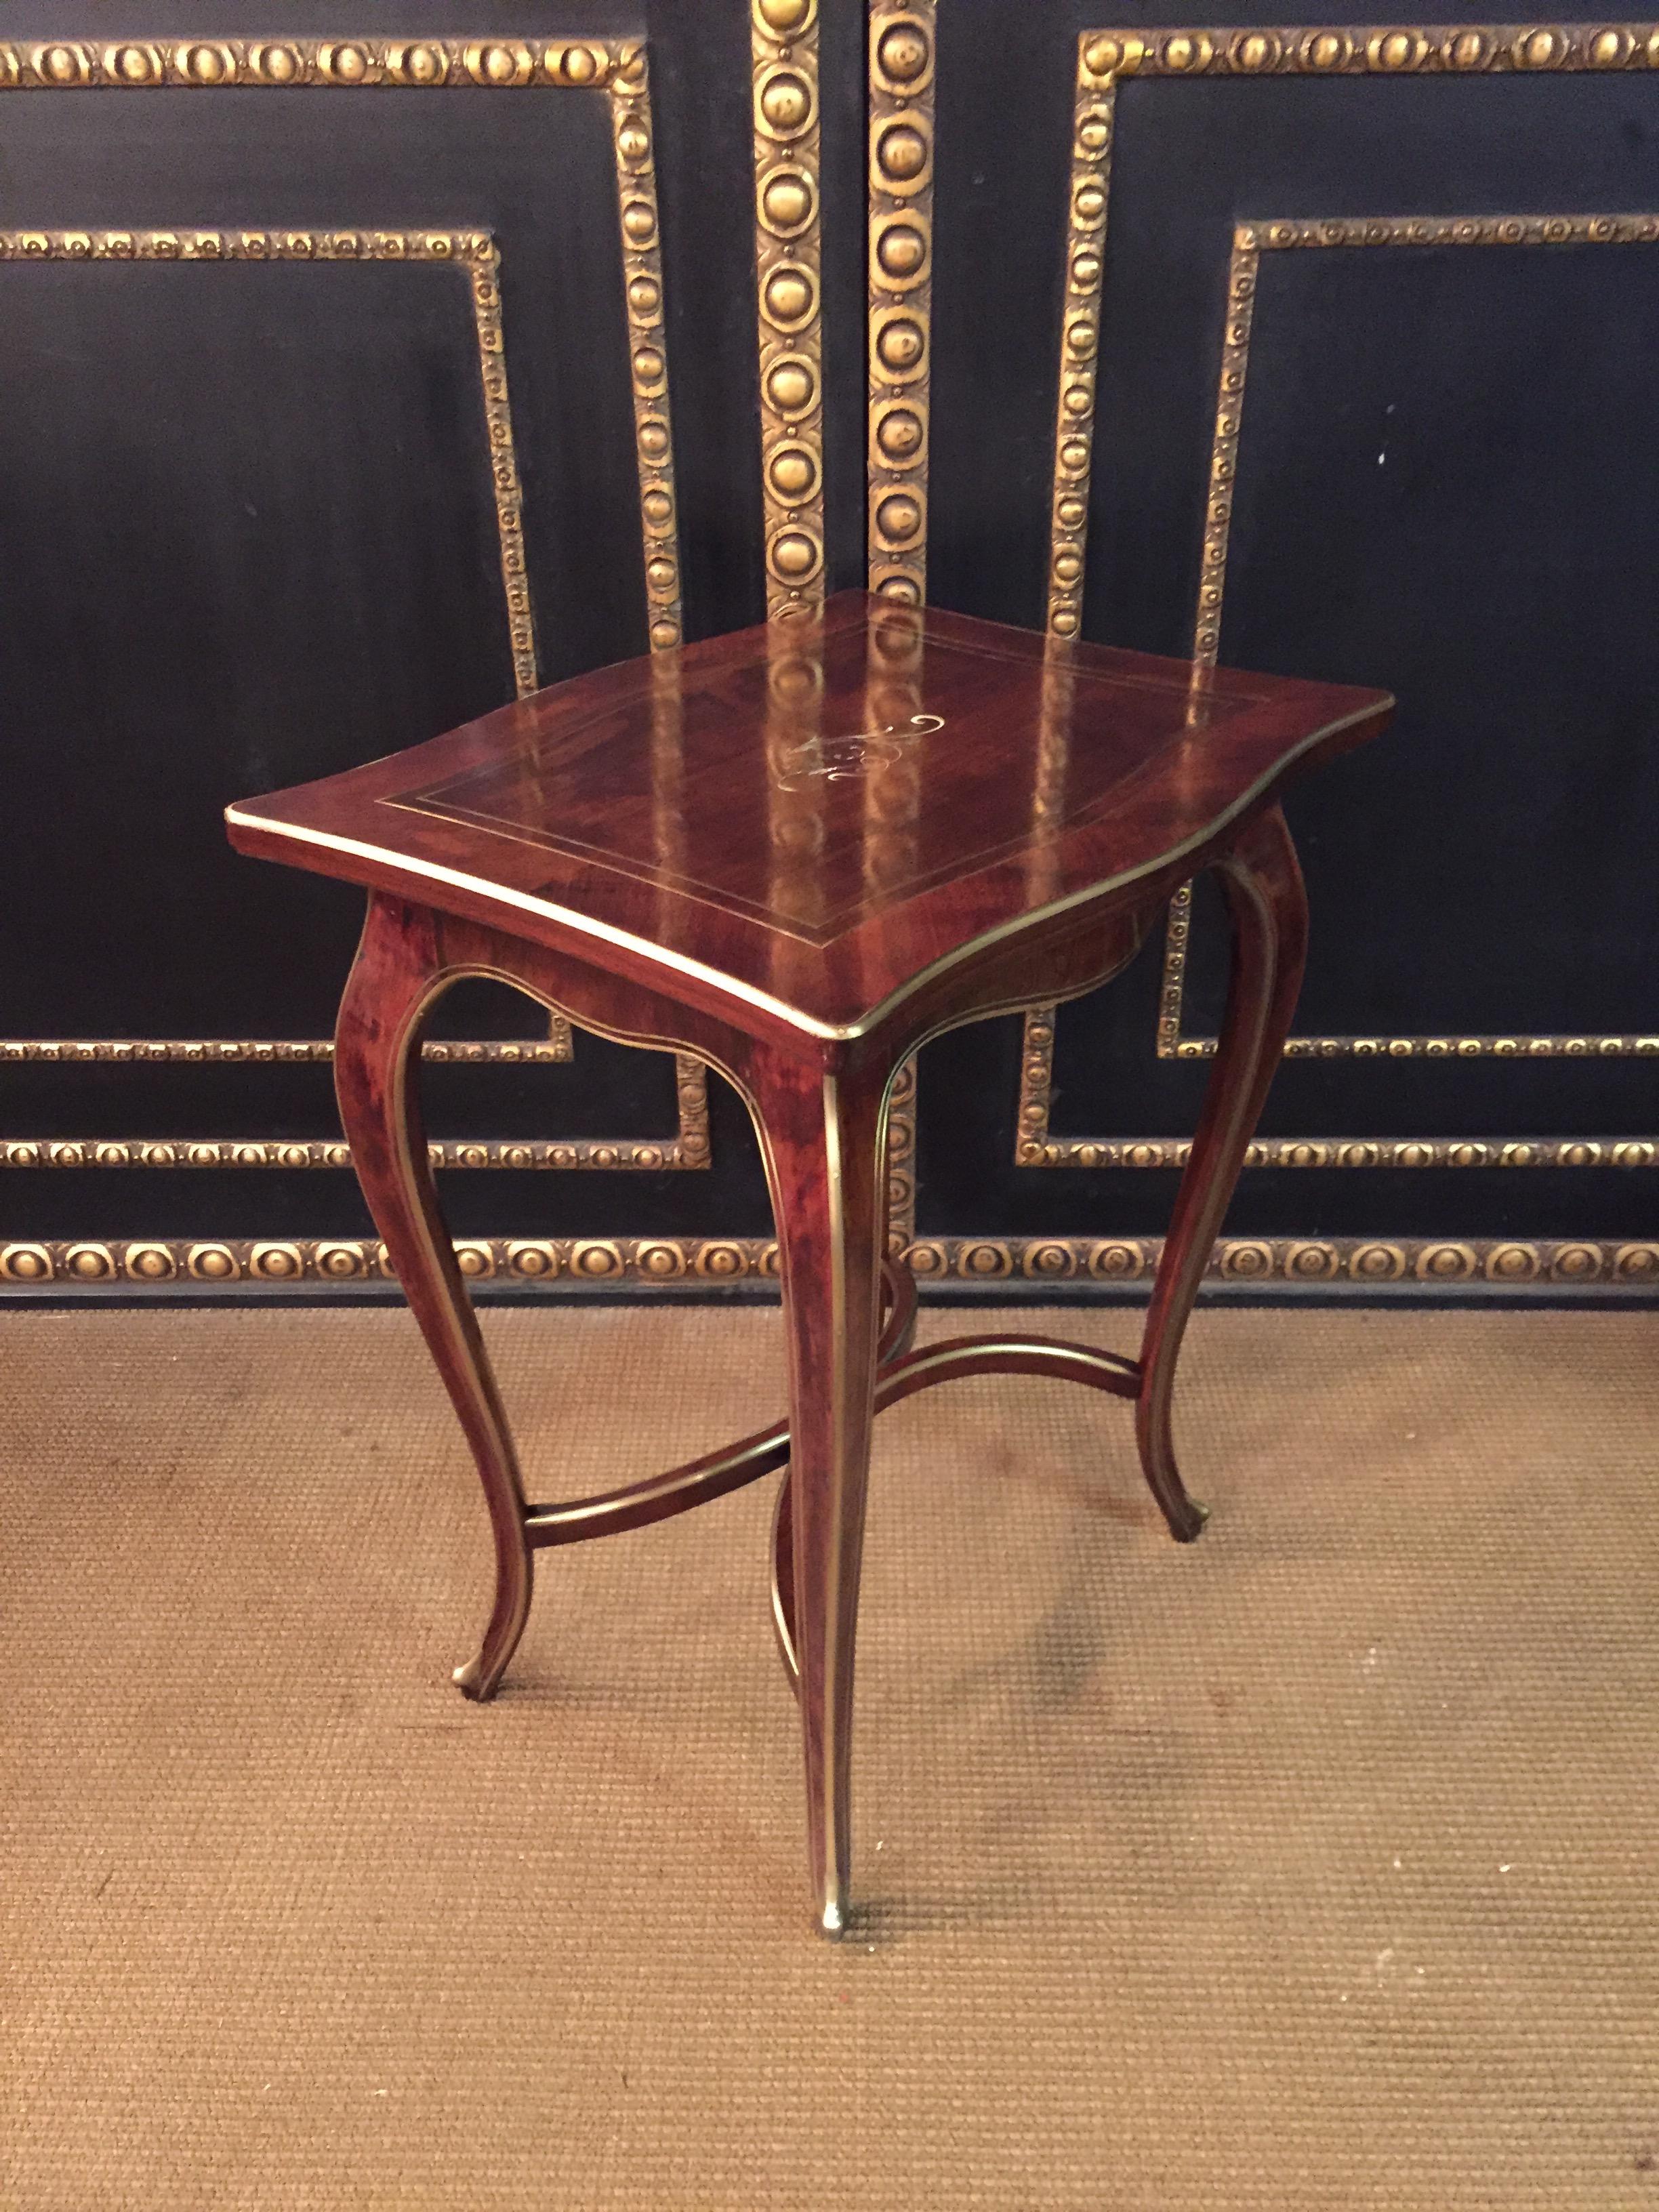 Antique Biedermeier Table Mahogany Inlaid with Mother Pearl 1870 6